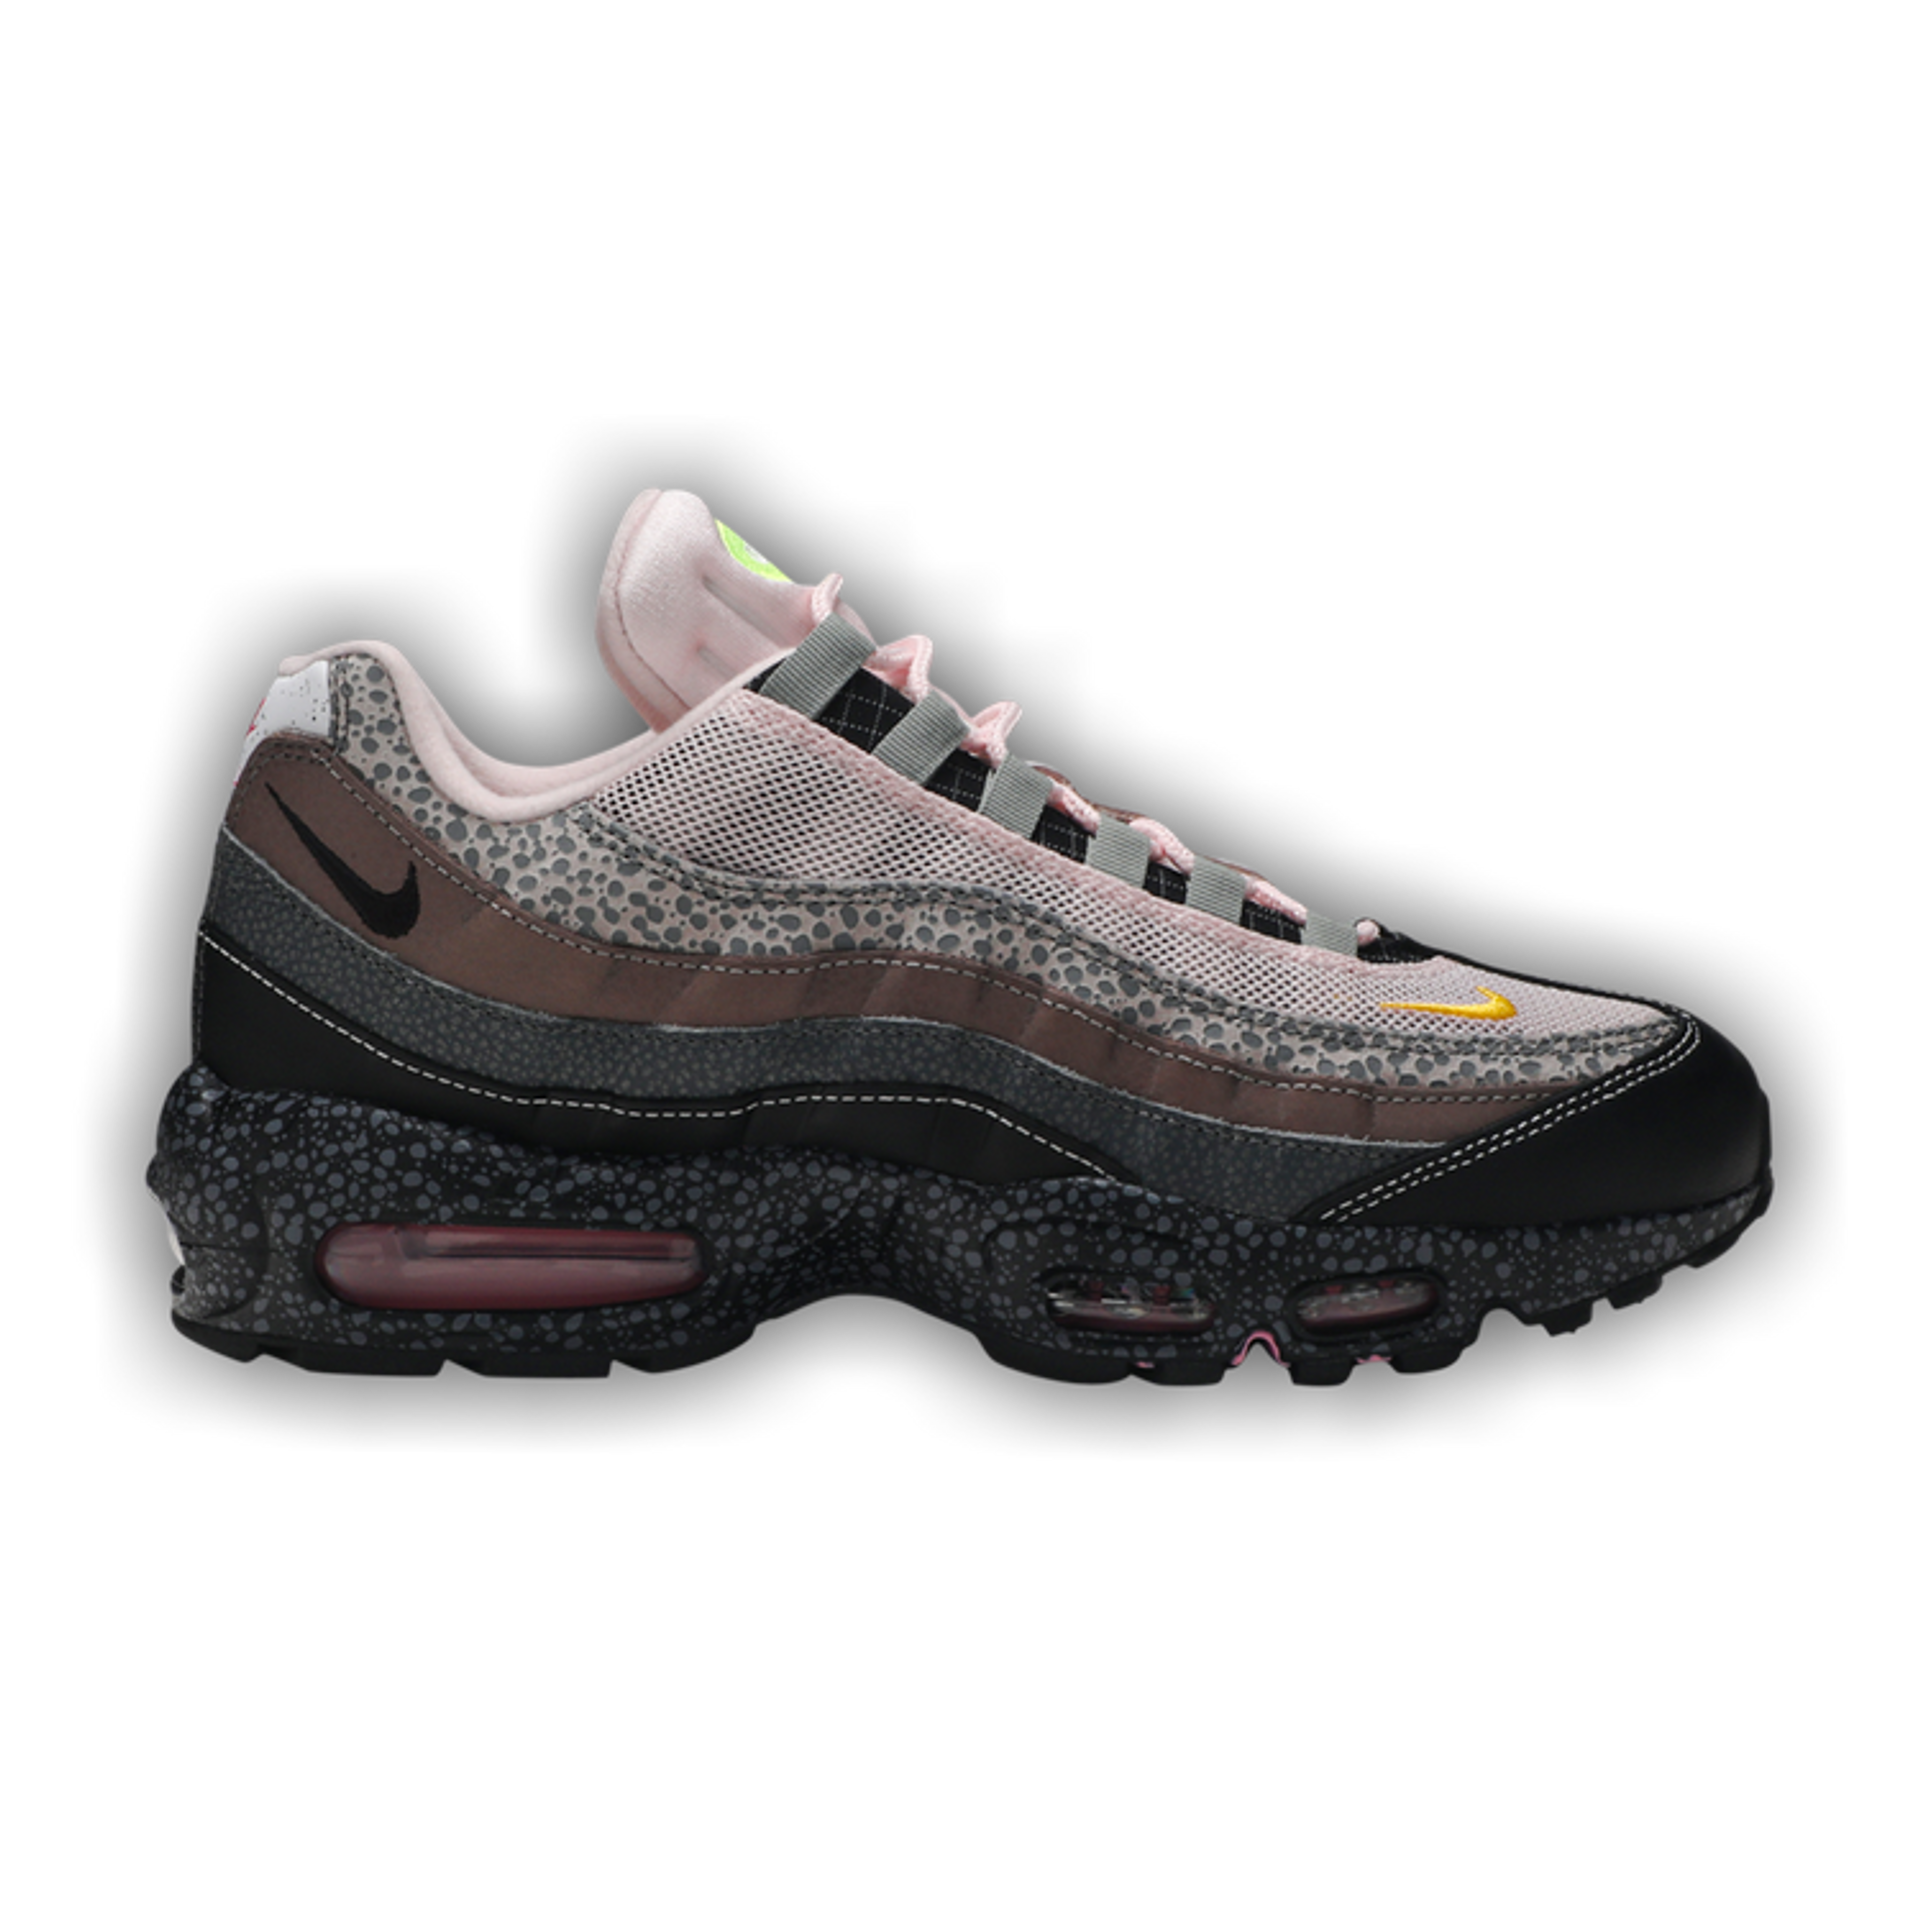 Nike size? x Air Max 95 '20 for 20'